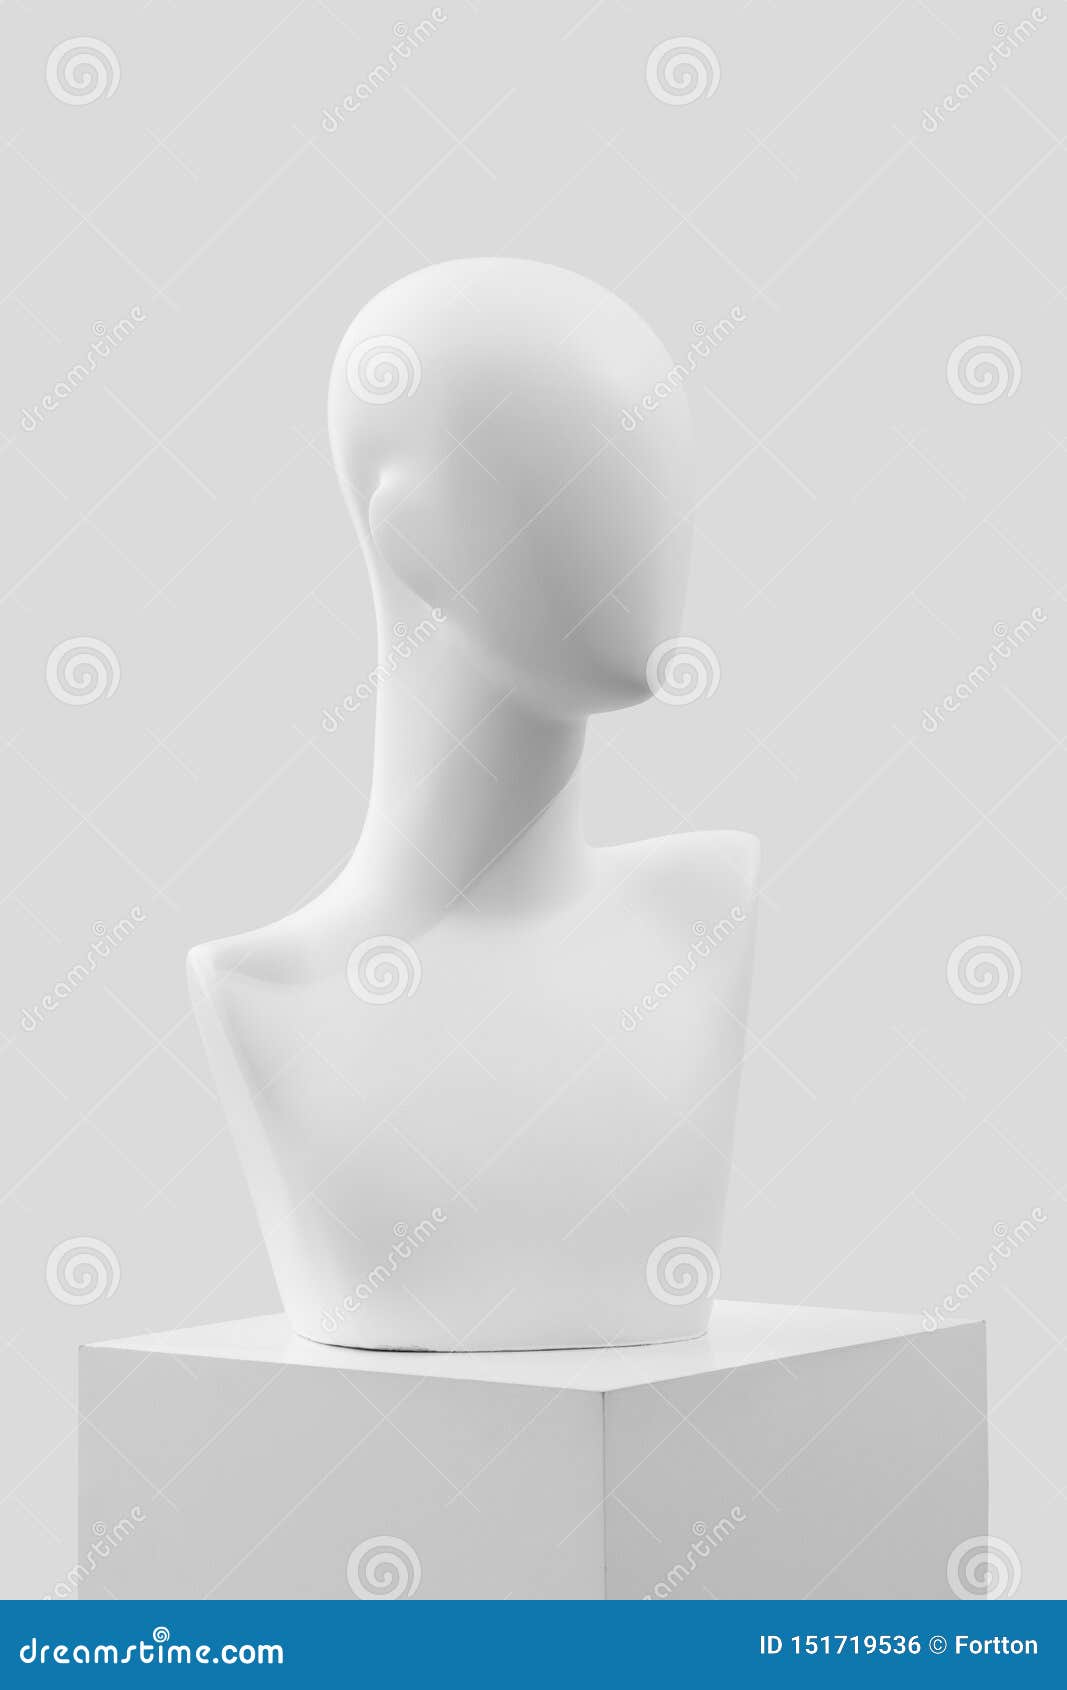 mannequin on a light background